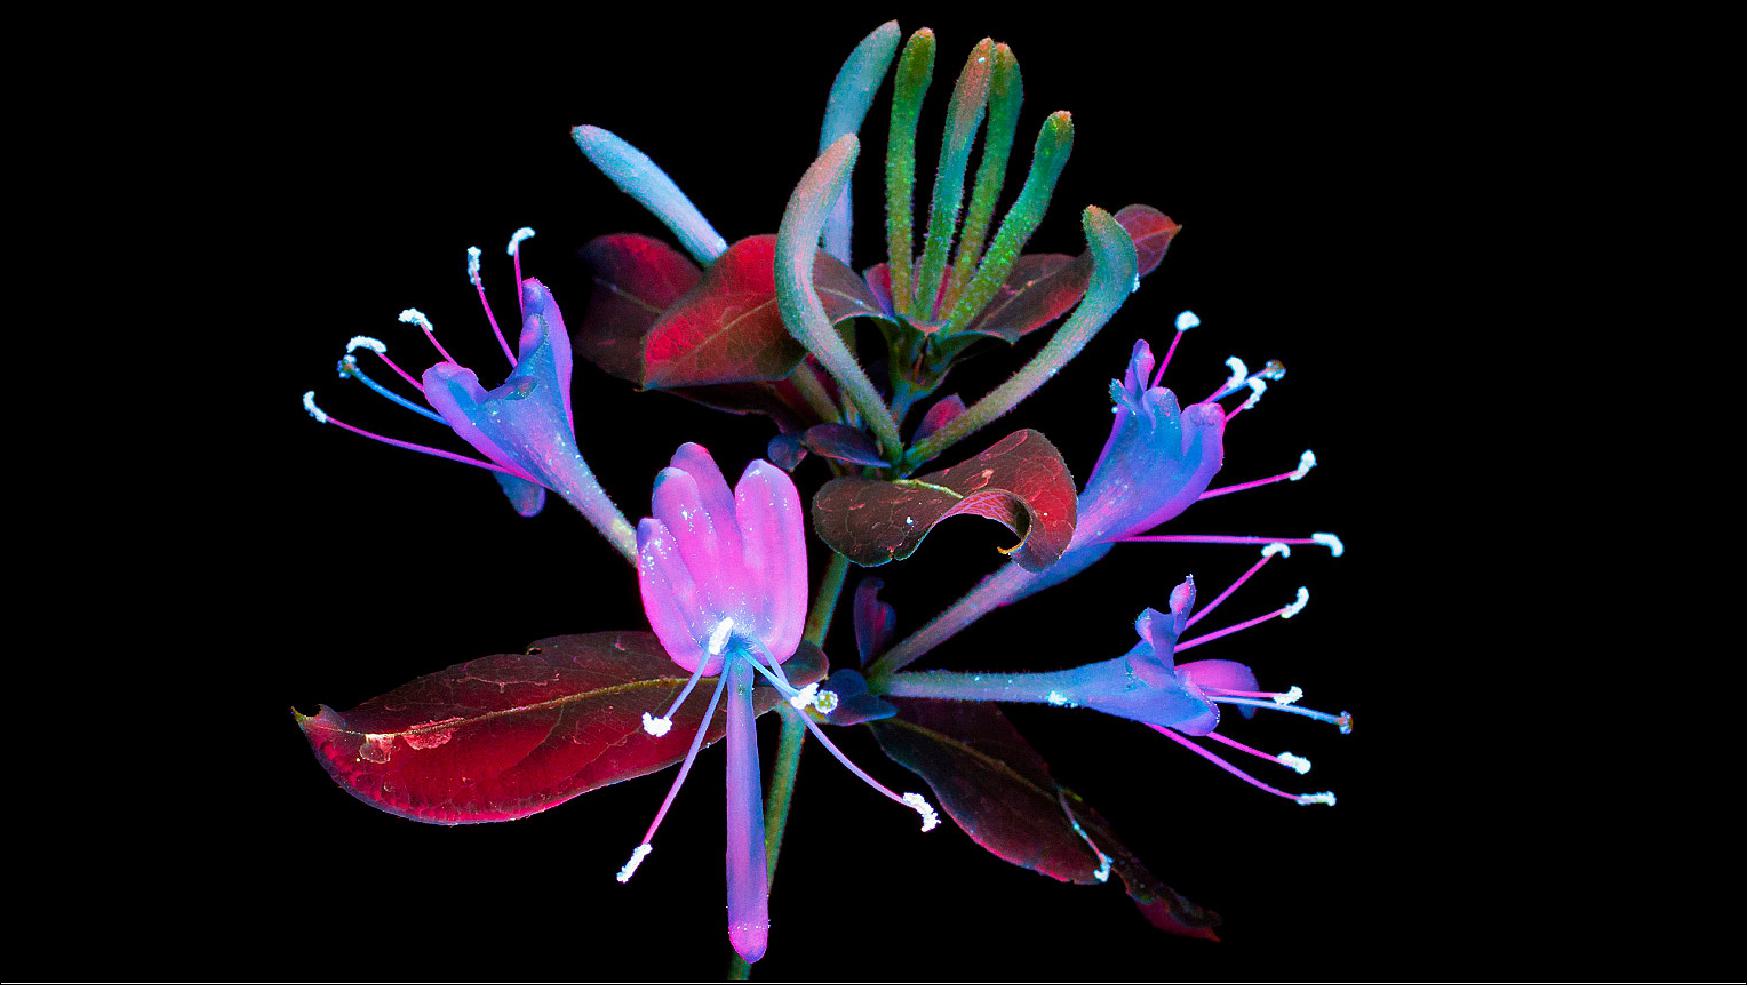 Figure 21: This honeysuckle is glowing in response to a high-energy ultraviolet light rather than to the Sun, but its shine is similar to the solar-induced fluorescence that OCO-3 will measure (image credit: ©Craig P. Burrows)